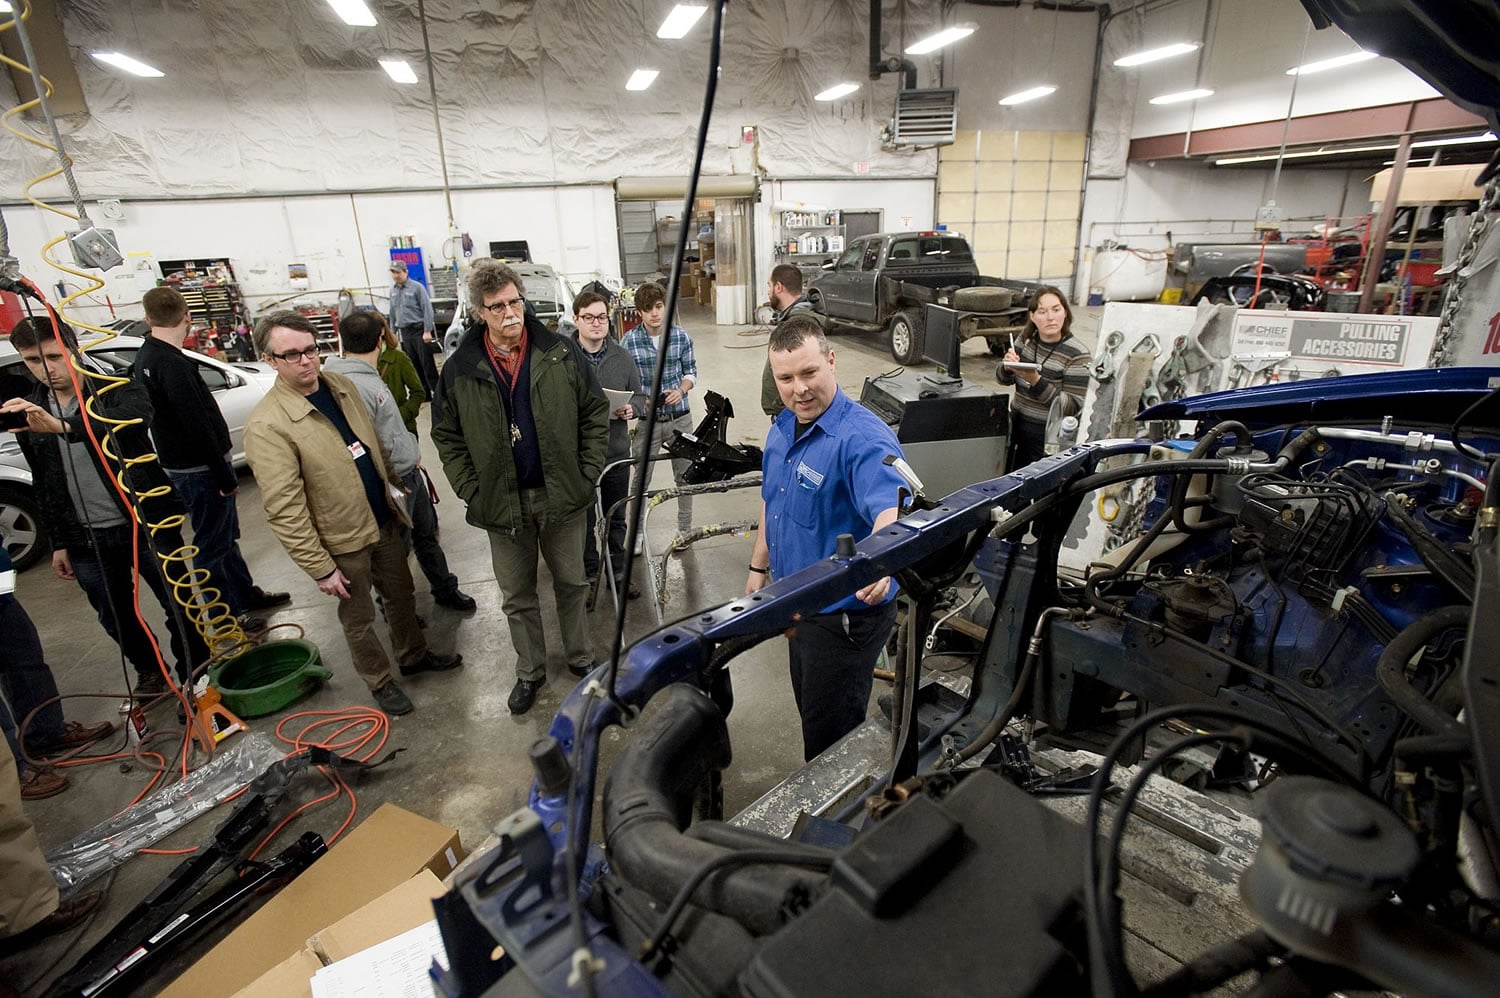 Photos by Steven Lane/The Columbian
Dick Hannah Collision Center Director Rick Stoker, center, gives a tour of the body shop to a group of Washington State University Vancouver students and OMSI representatives working on an exhibit for the Portland museum.